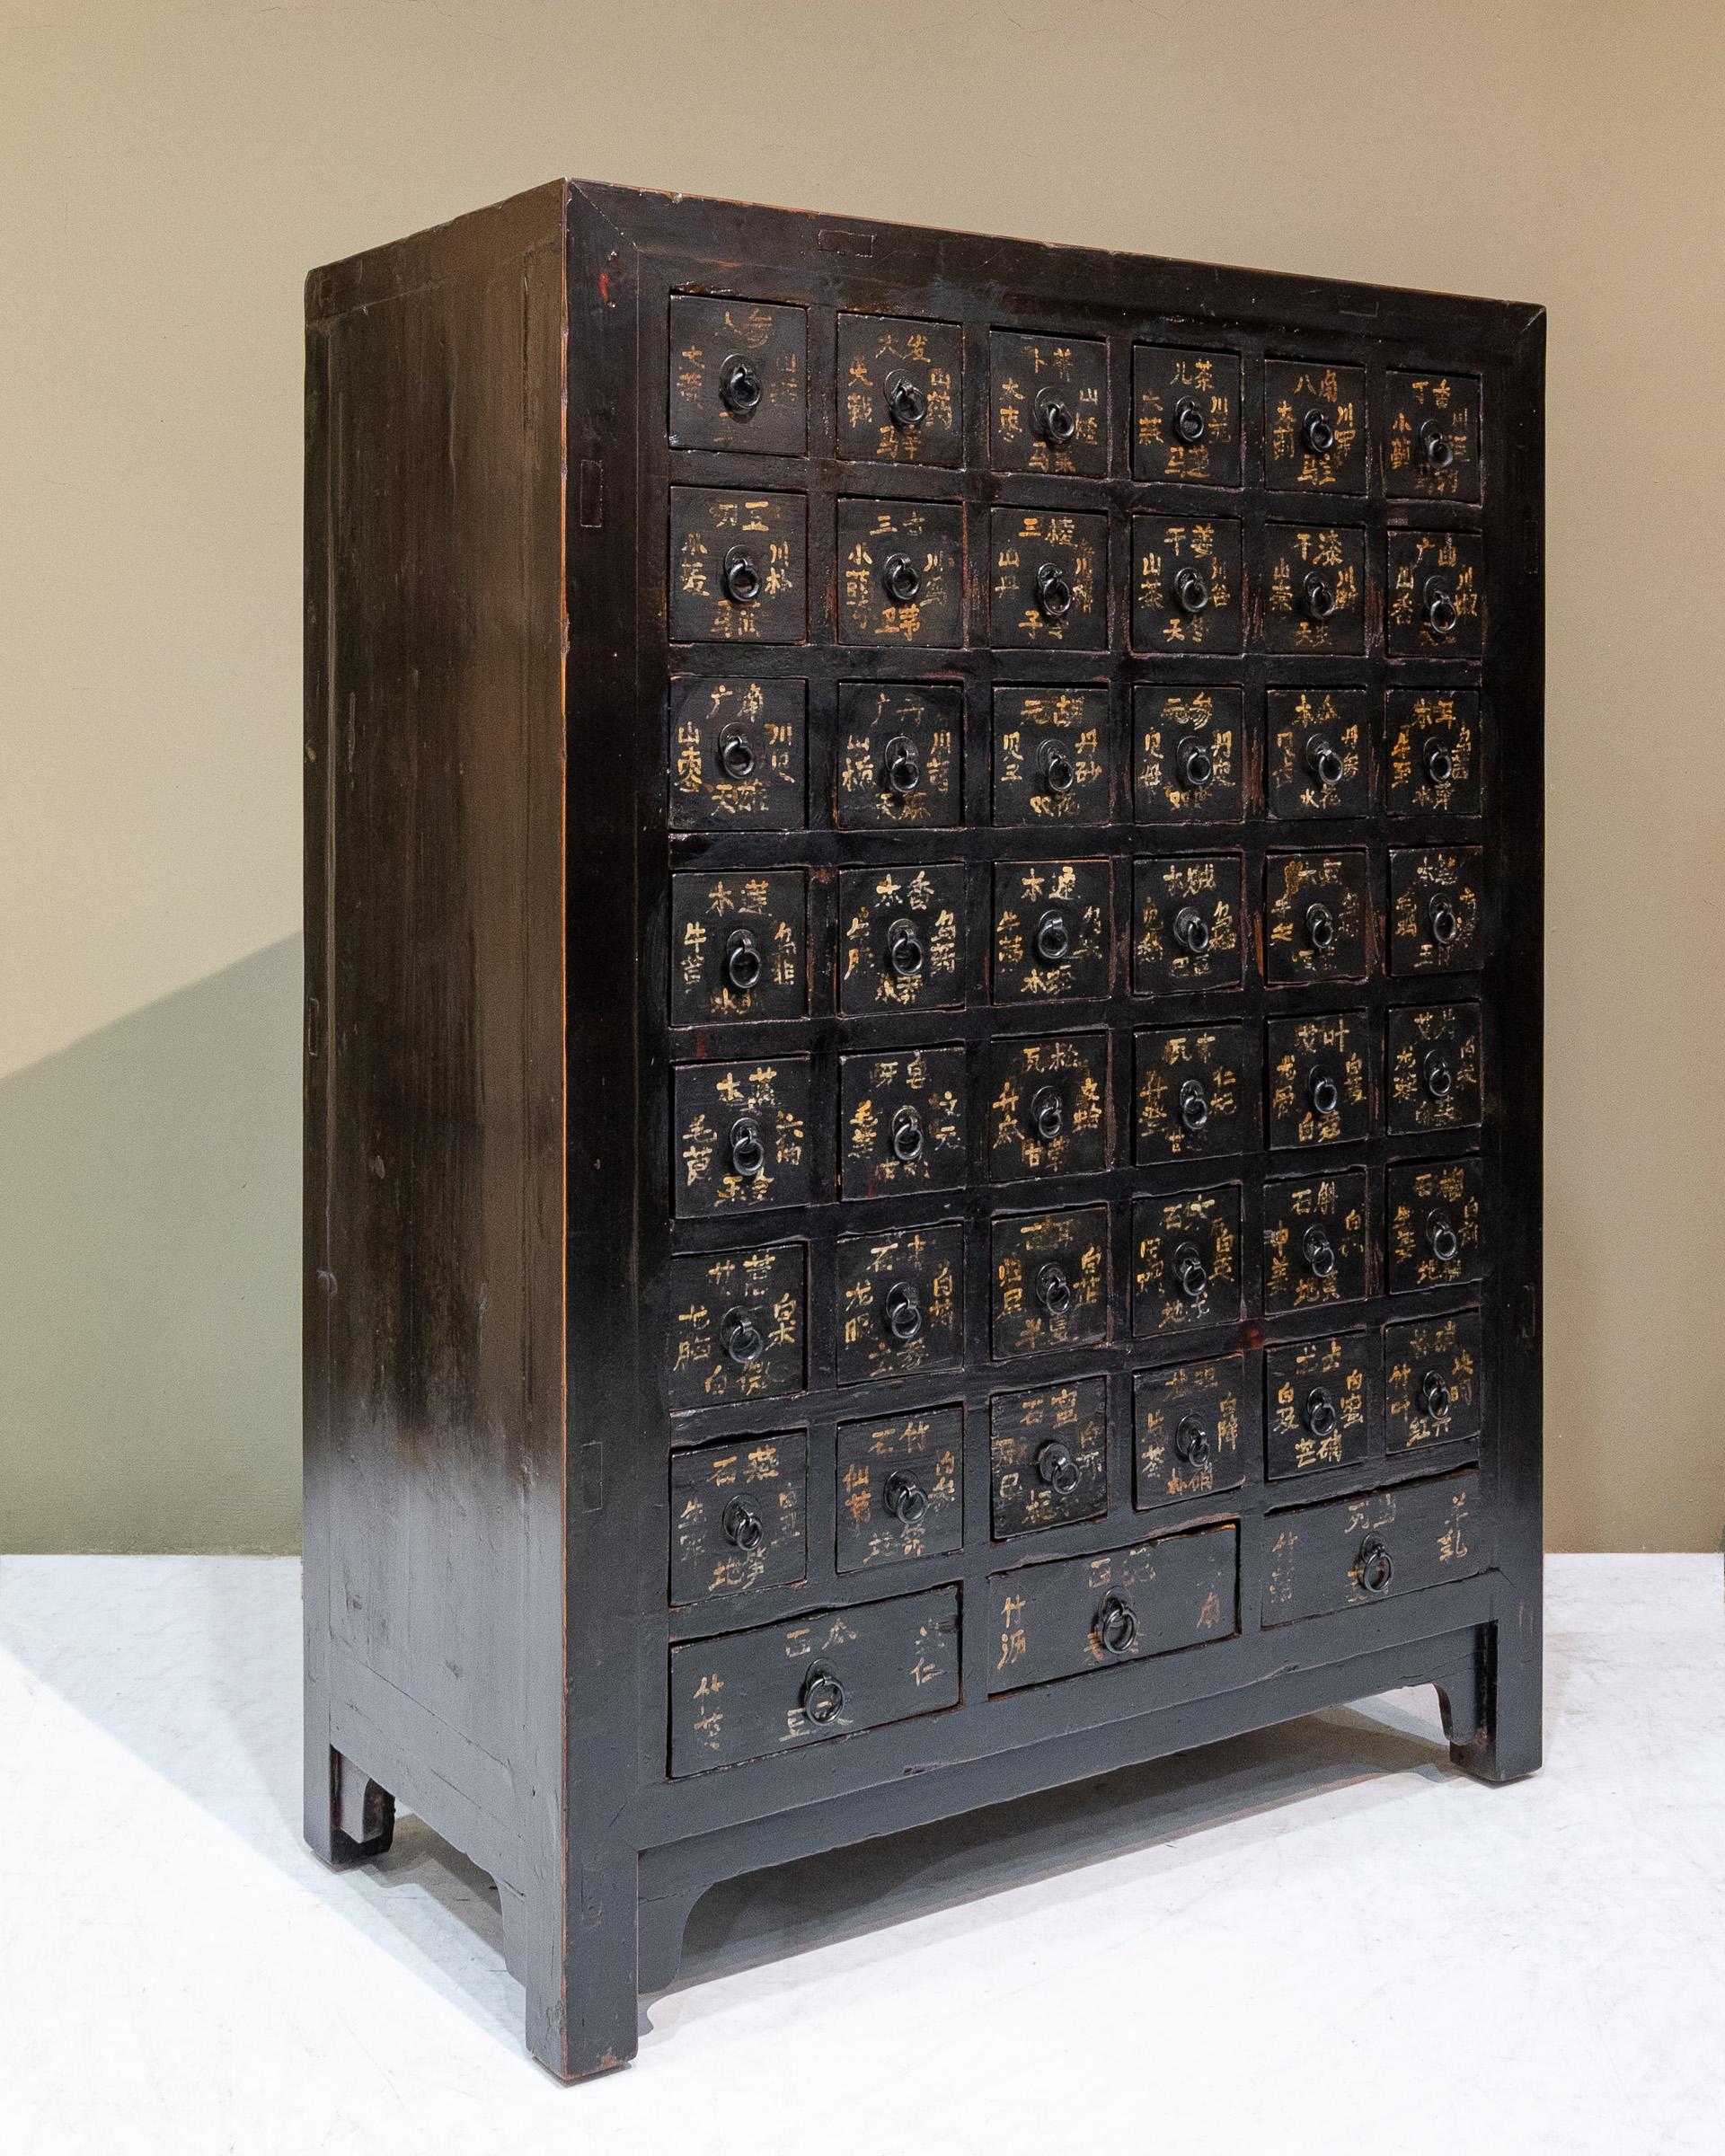 Late 19th century Chinese medicine cabinet from Shanxi province, China. These were used to store and organise Chinese herbs and the handwritten words on the front of the drawers indicate the herbs that were stored in each drawer. Some of the